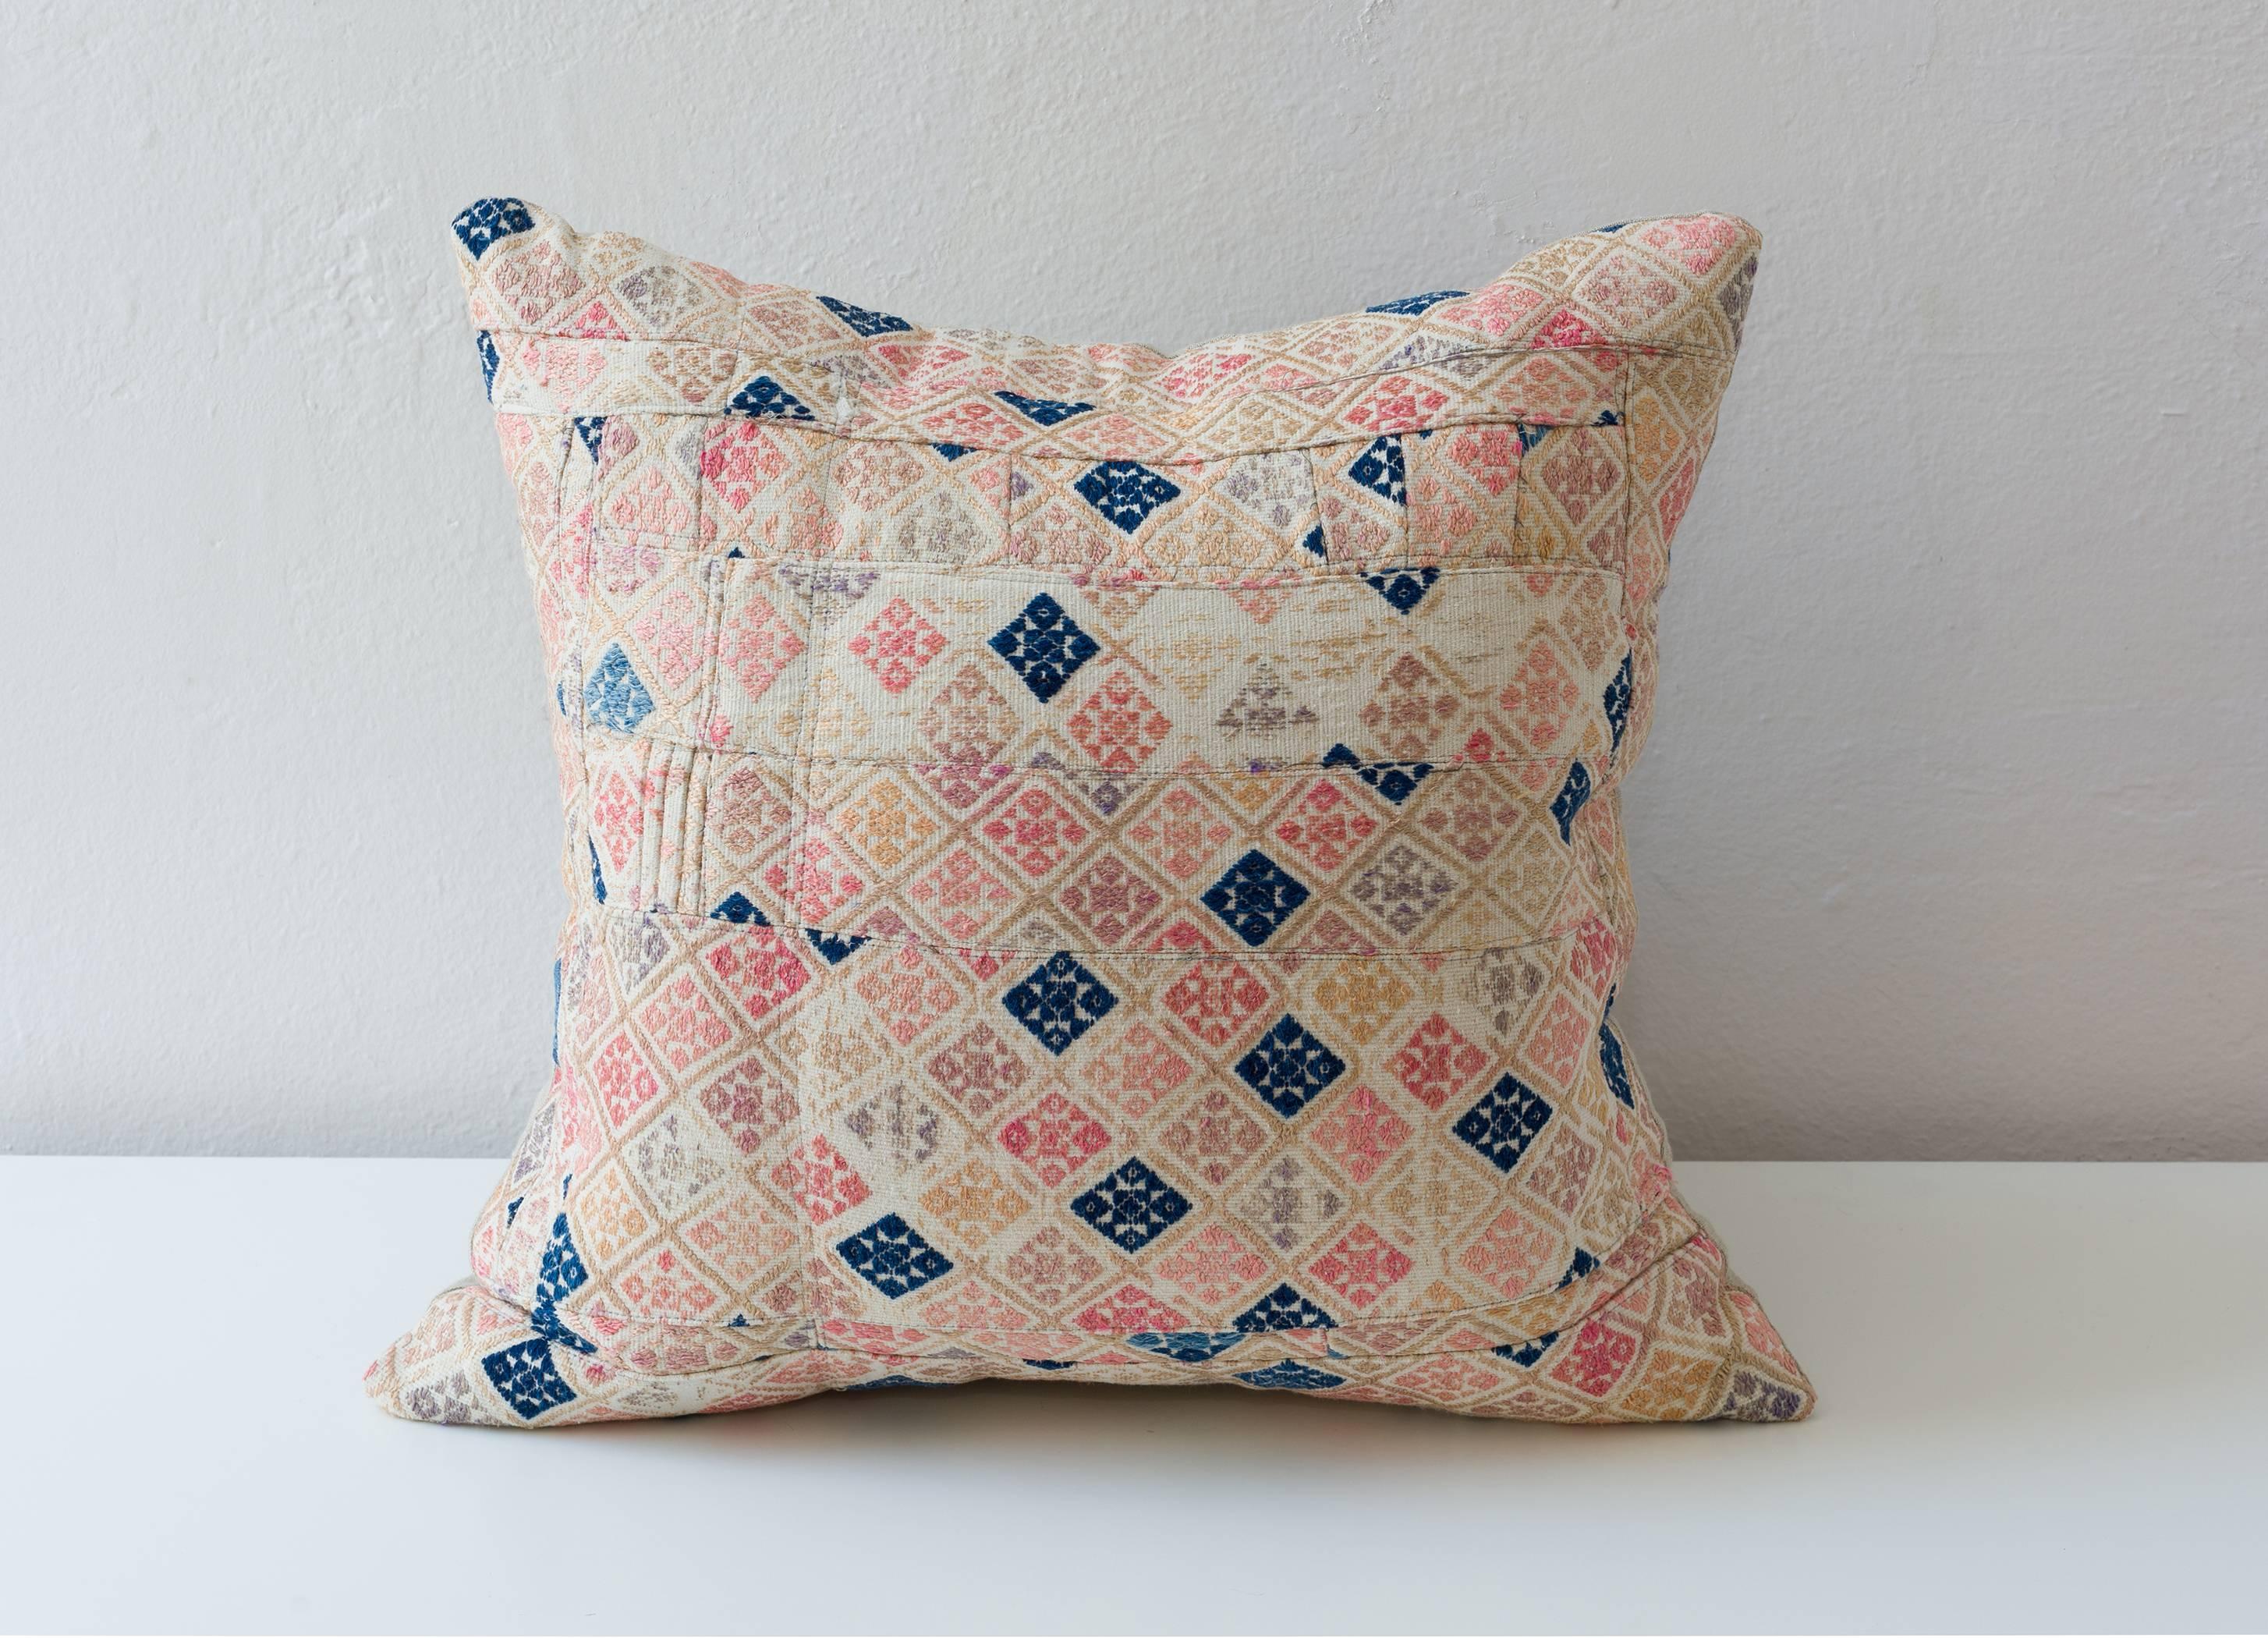 Chinese Zhuang Piecework Cushion in Pinks with Accents of Indigo For Sale